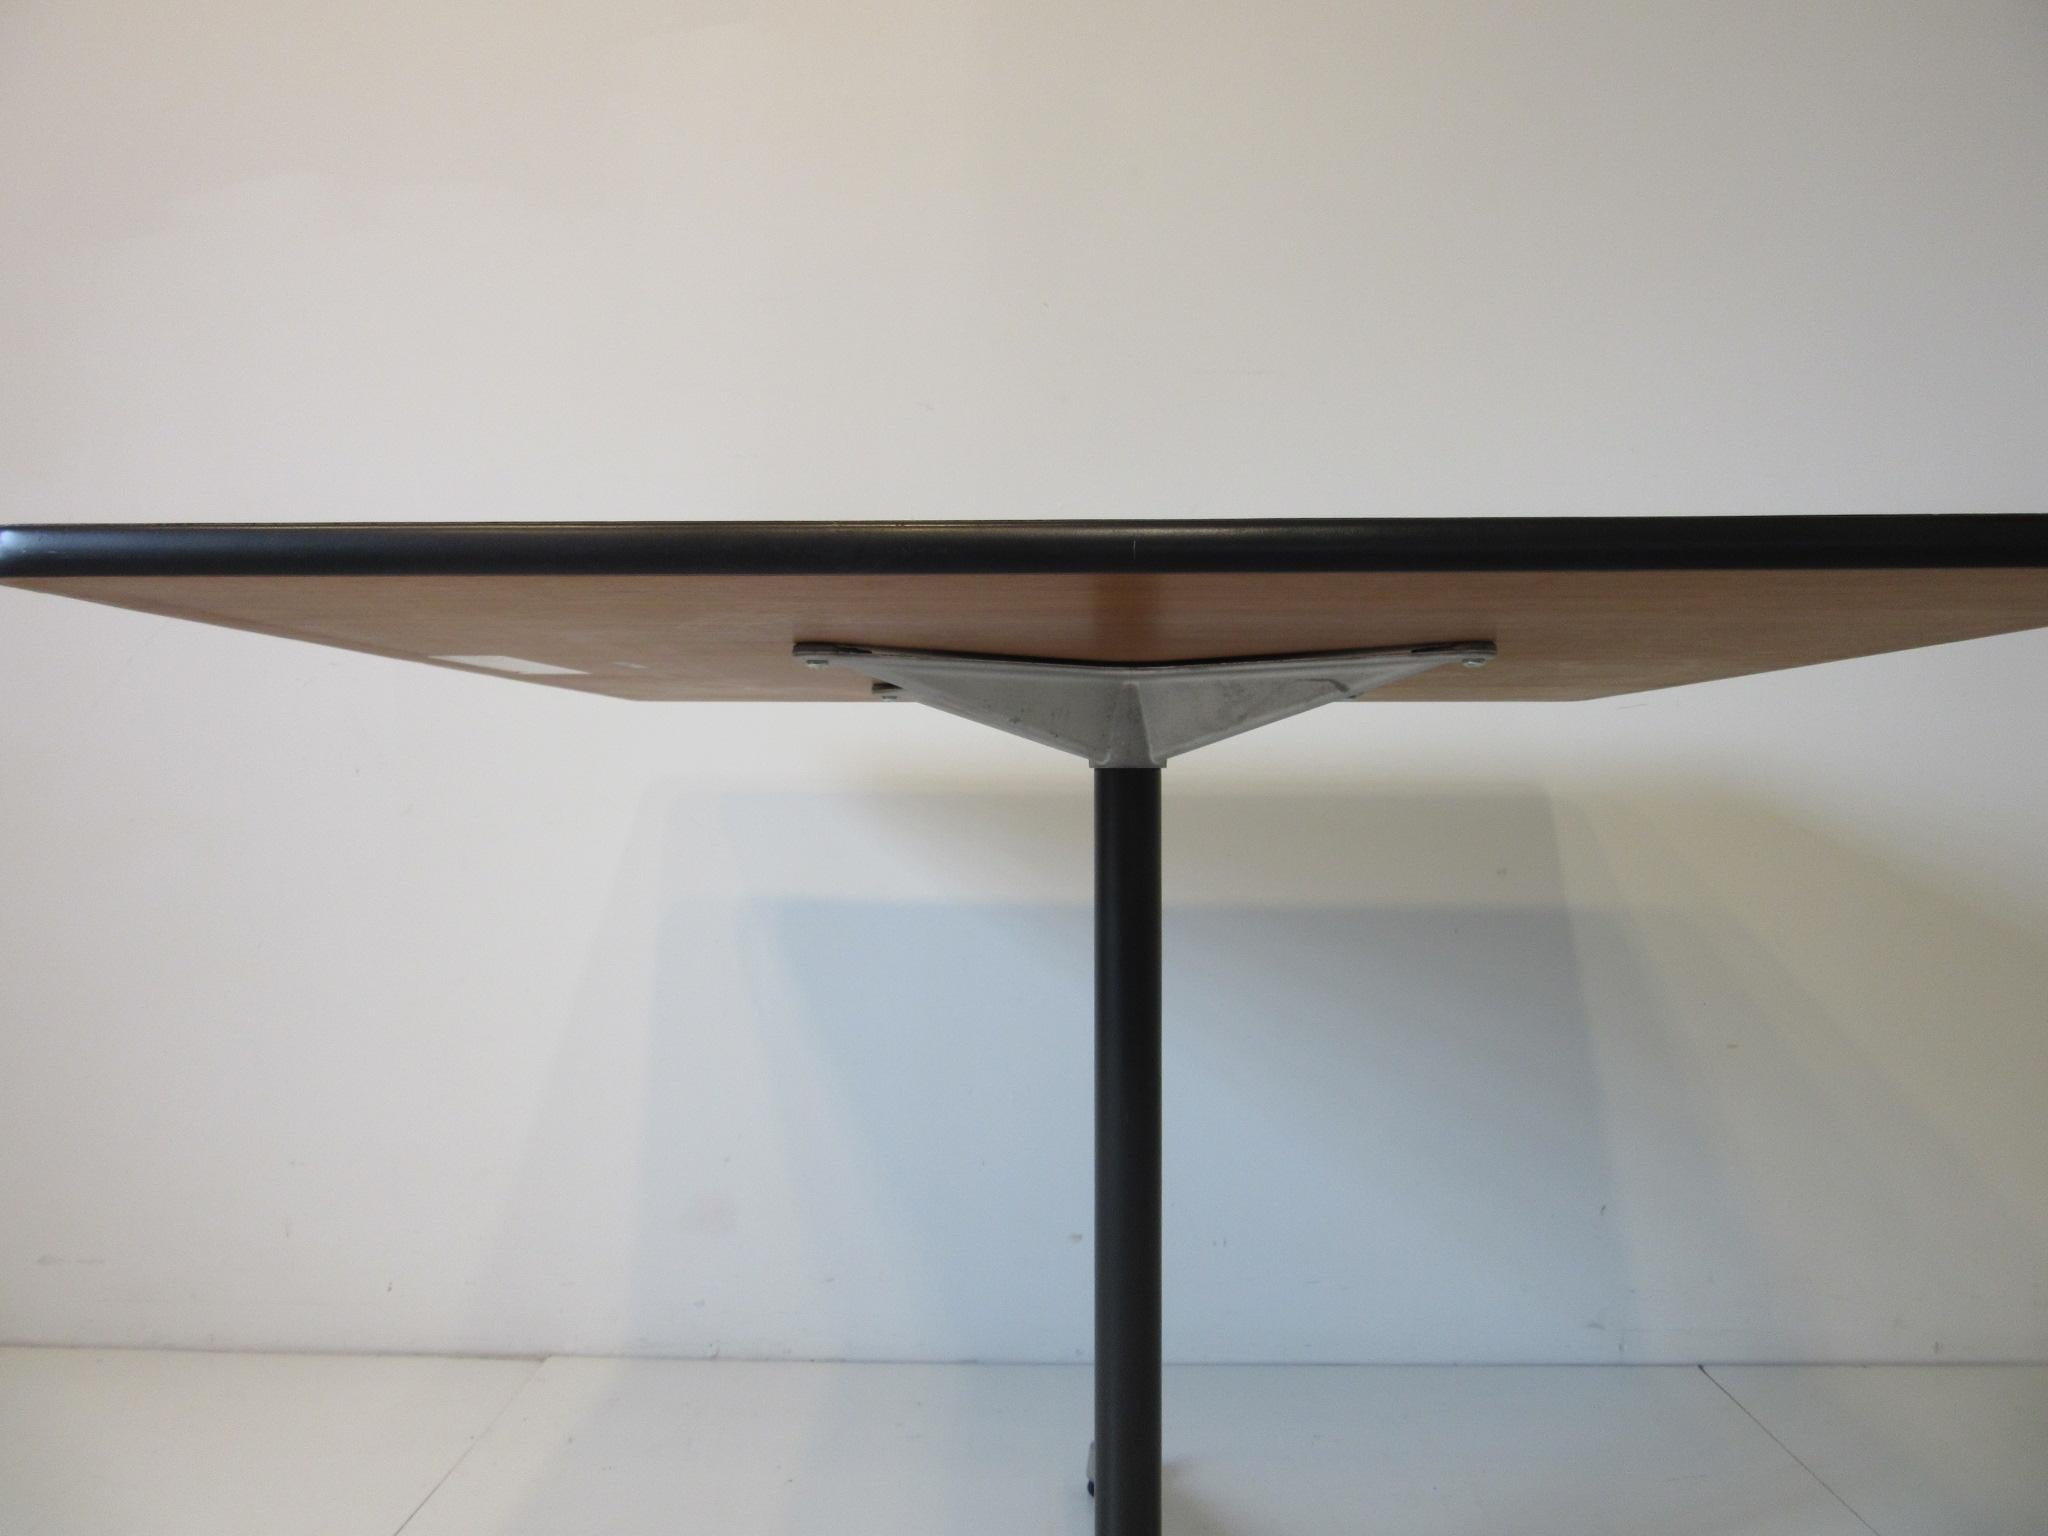 Mid-Century Modern Eames Dining Table From the Aluminum Group Rosewood by Herman Miller